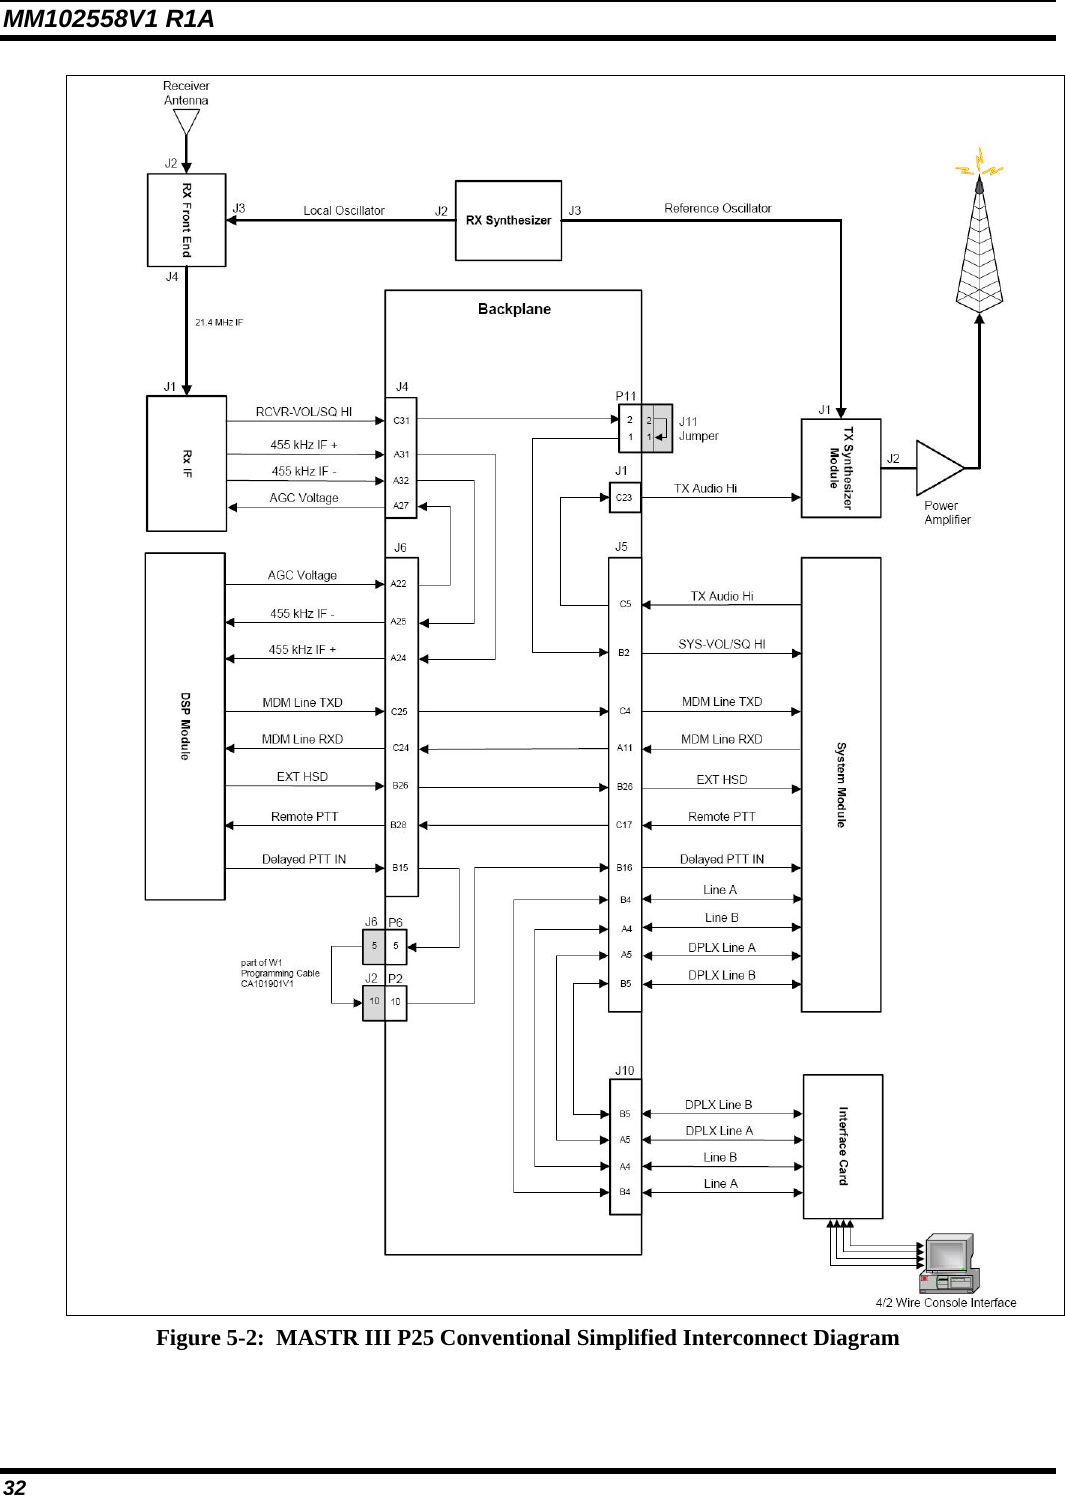 MM102558V1 R1A  Figure 5-2:  MASTR III P25 Conventional Simplified Interconnect Diagram  32 